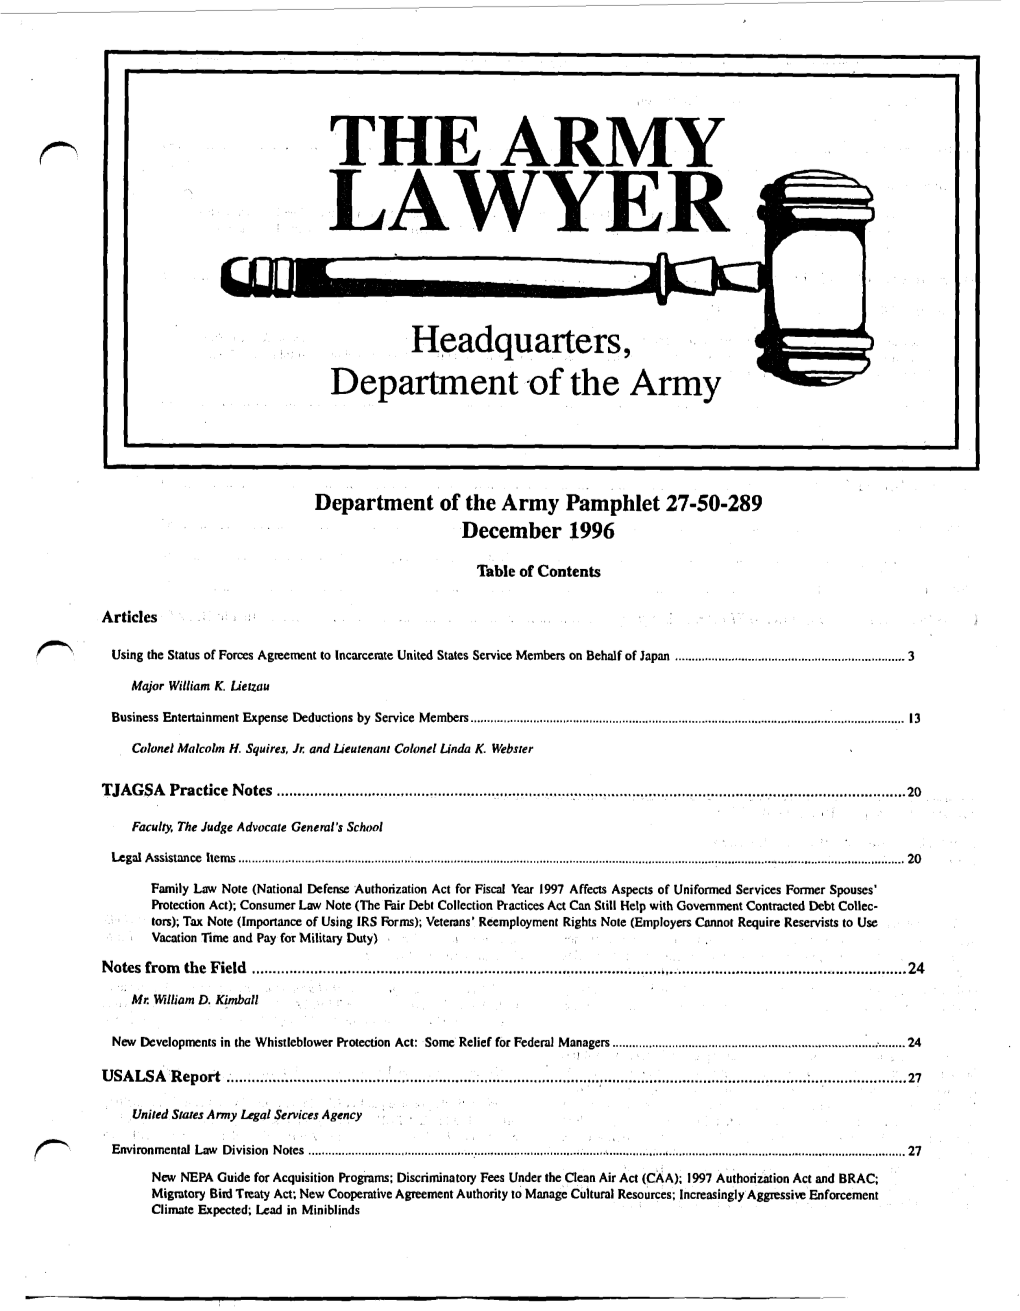 The Army Lawyer (ISSN 0364-1287)